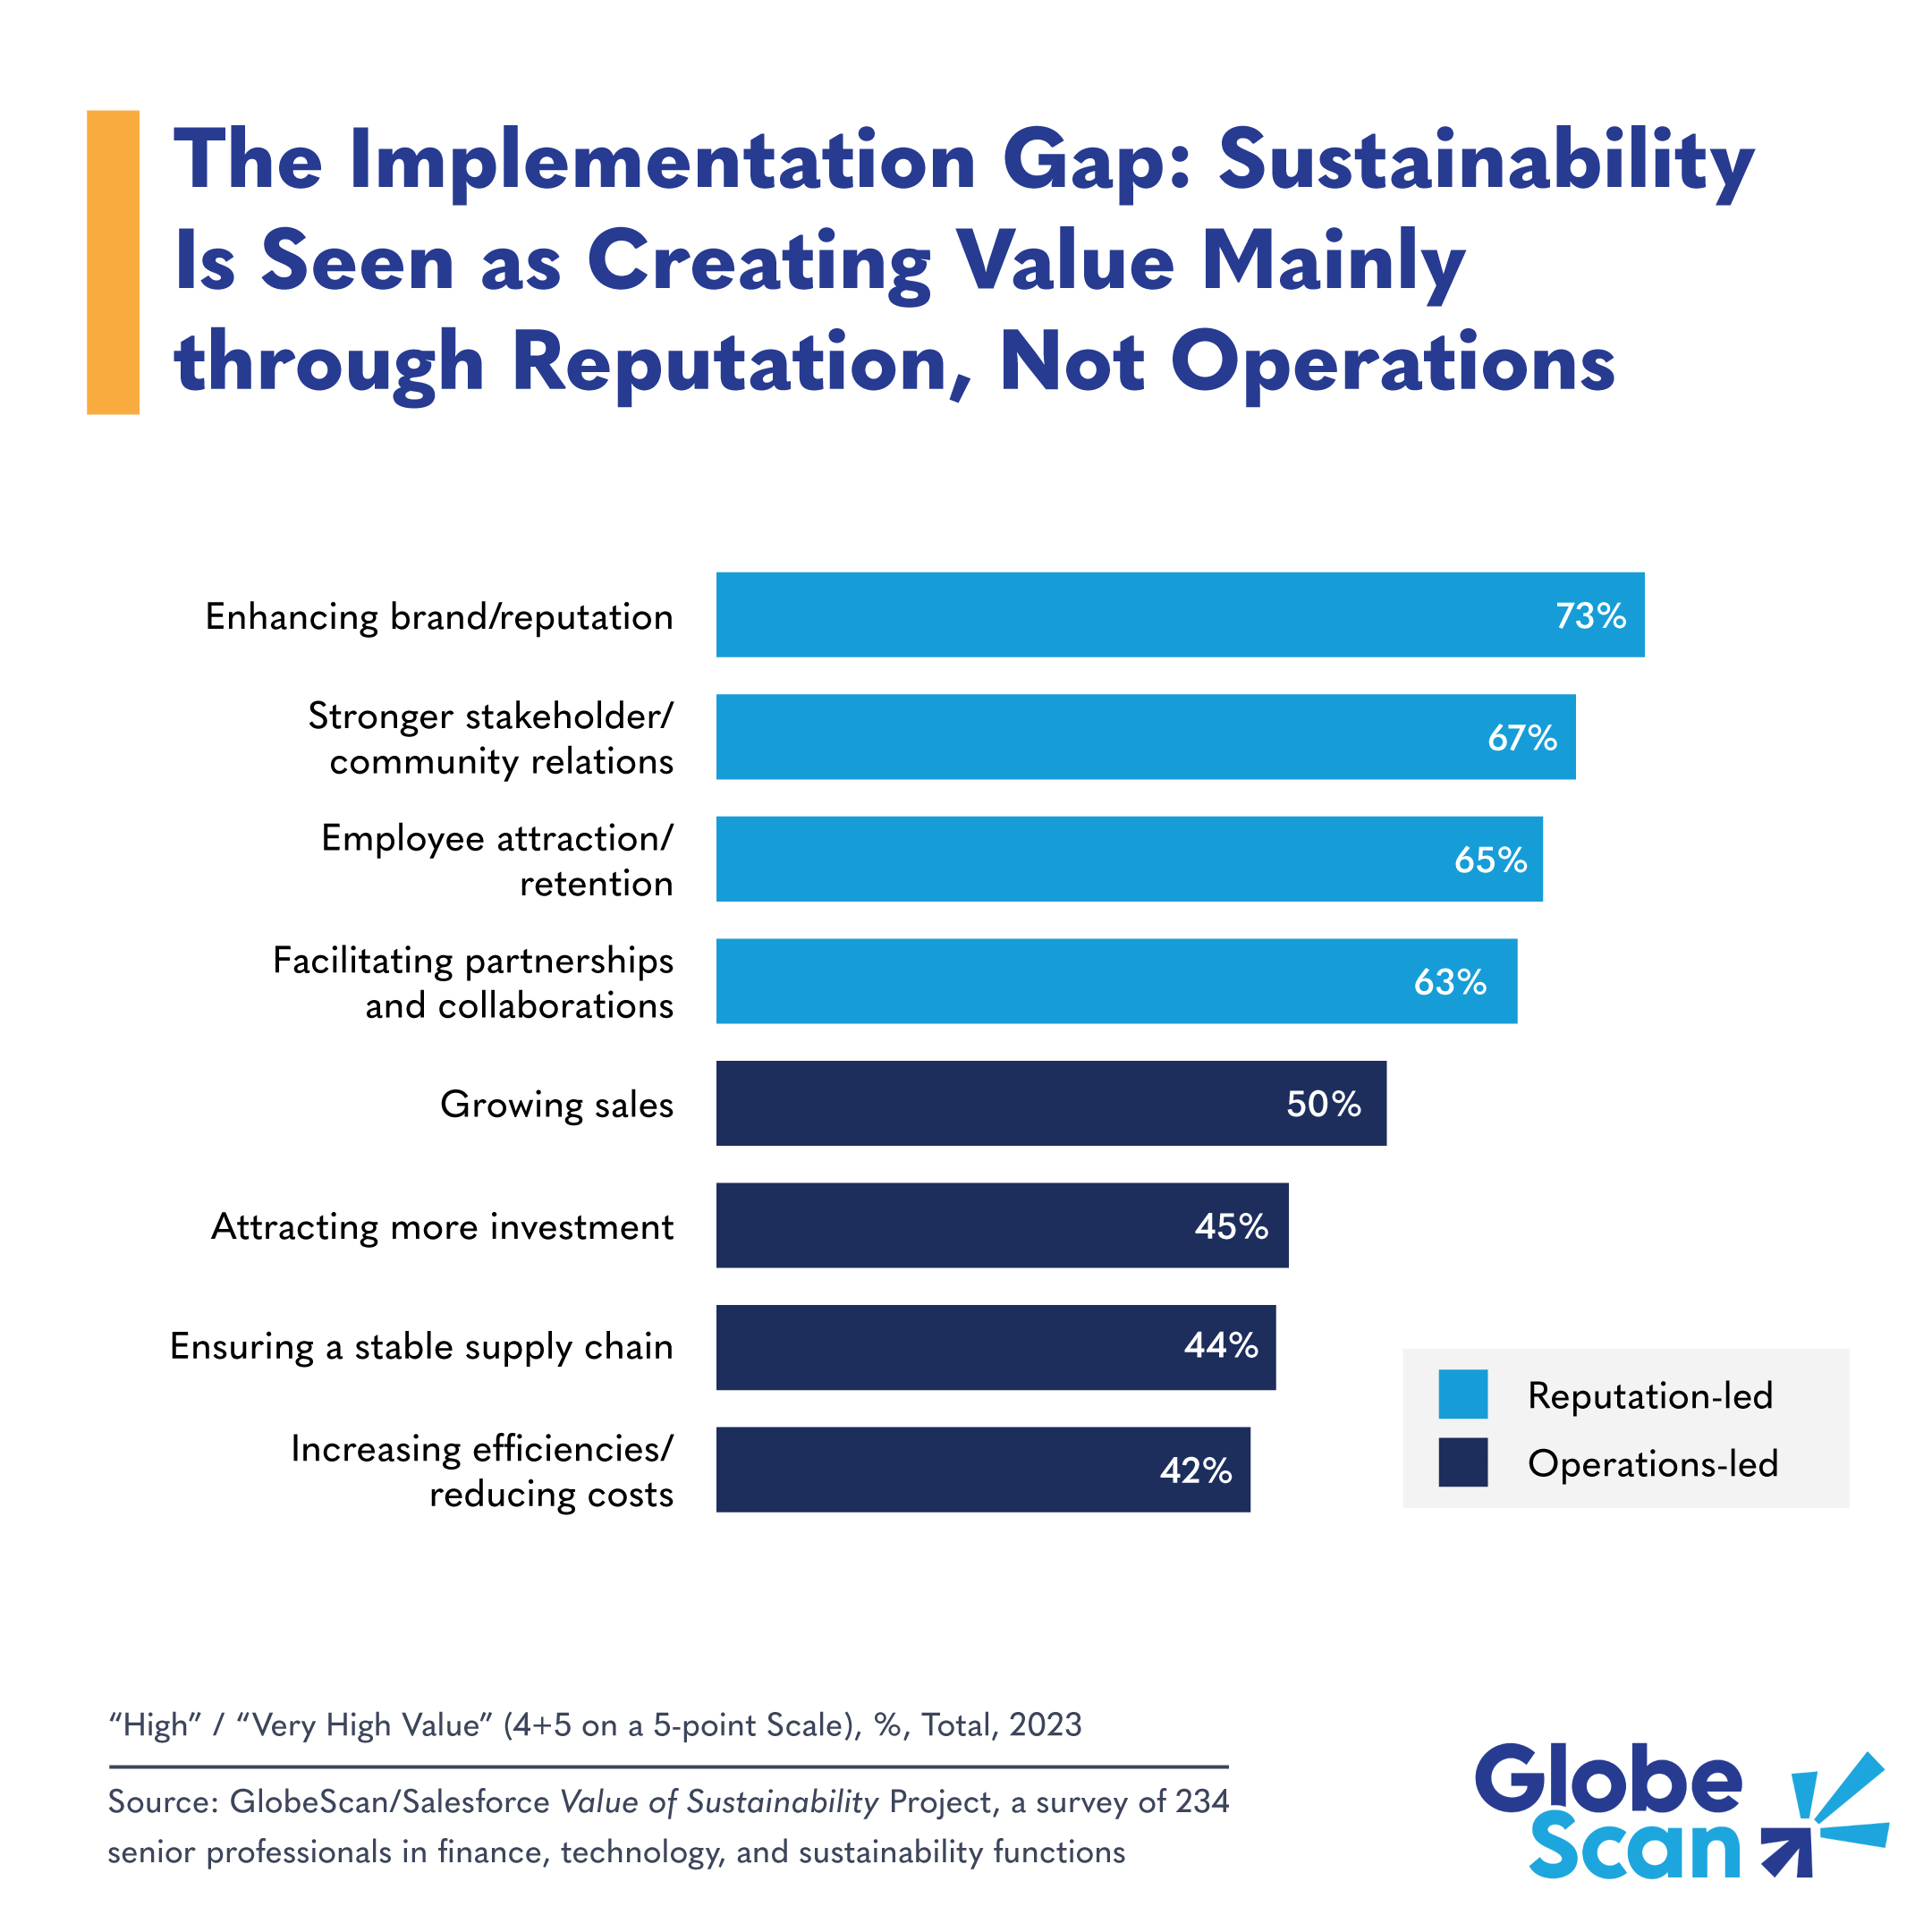 The Implementation Gap: Sustainability Is Seen as Creating Value Mainly Through Reputation, Not Operations